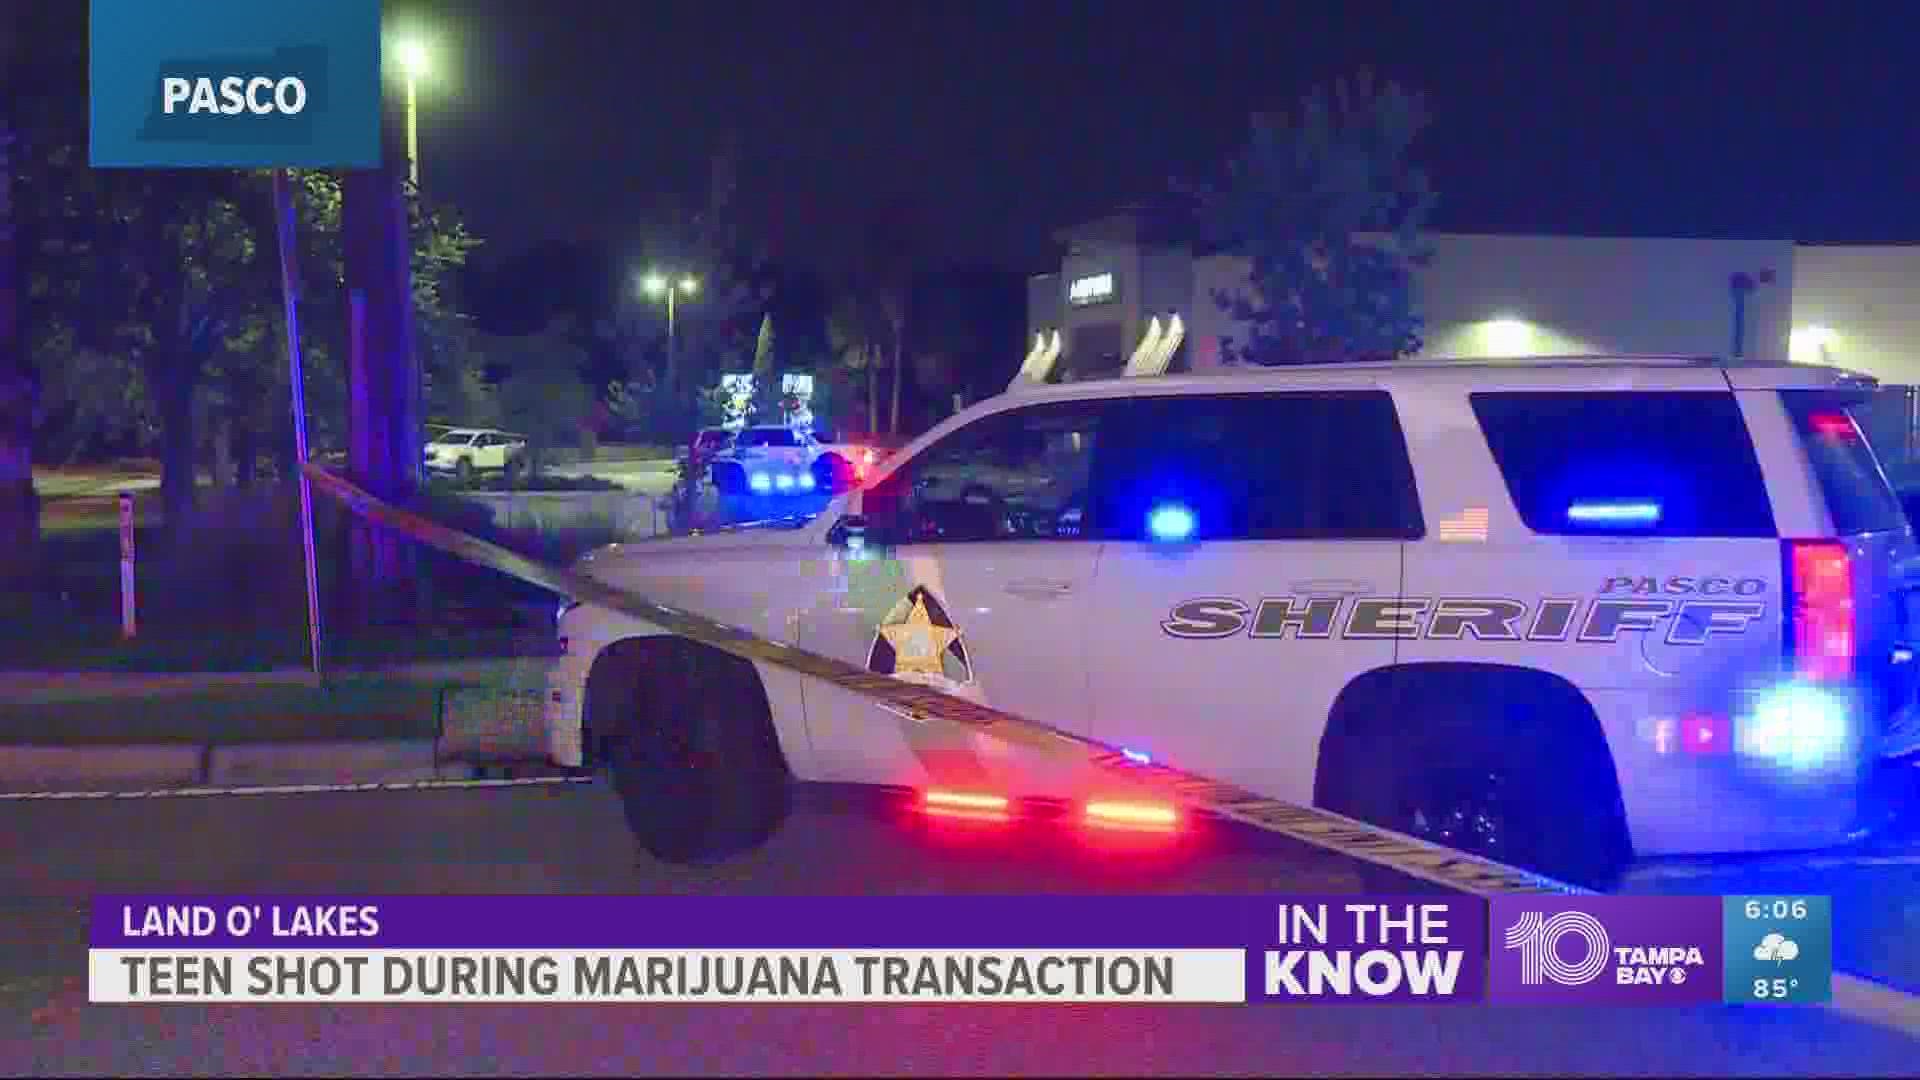 Two teens were trying to sell marijuana in the parking lot near Tropical Smoothie Cafe.